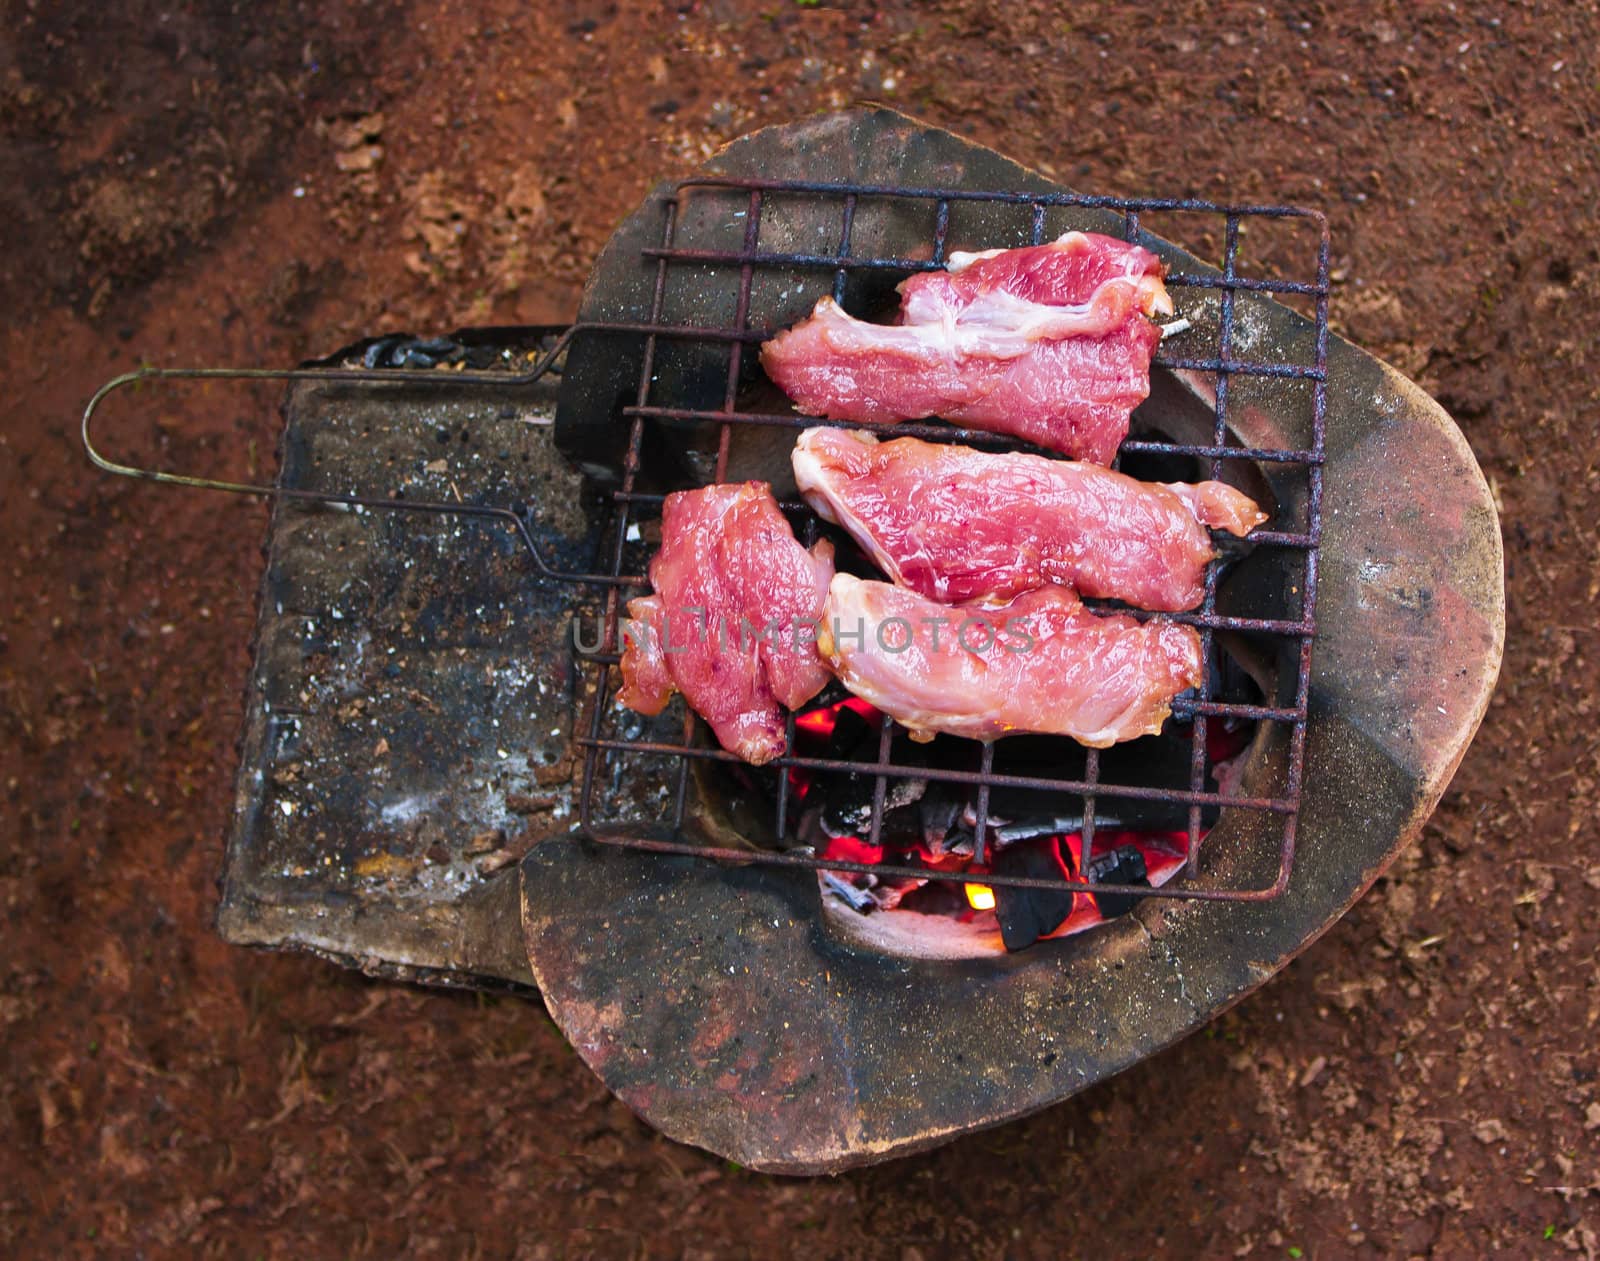 Traditional charcoal-grilled meat on the ground